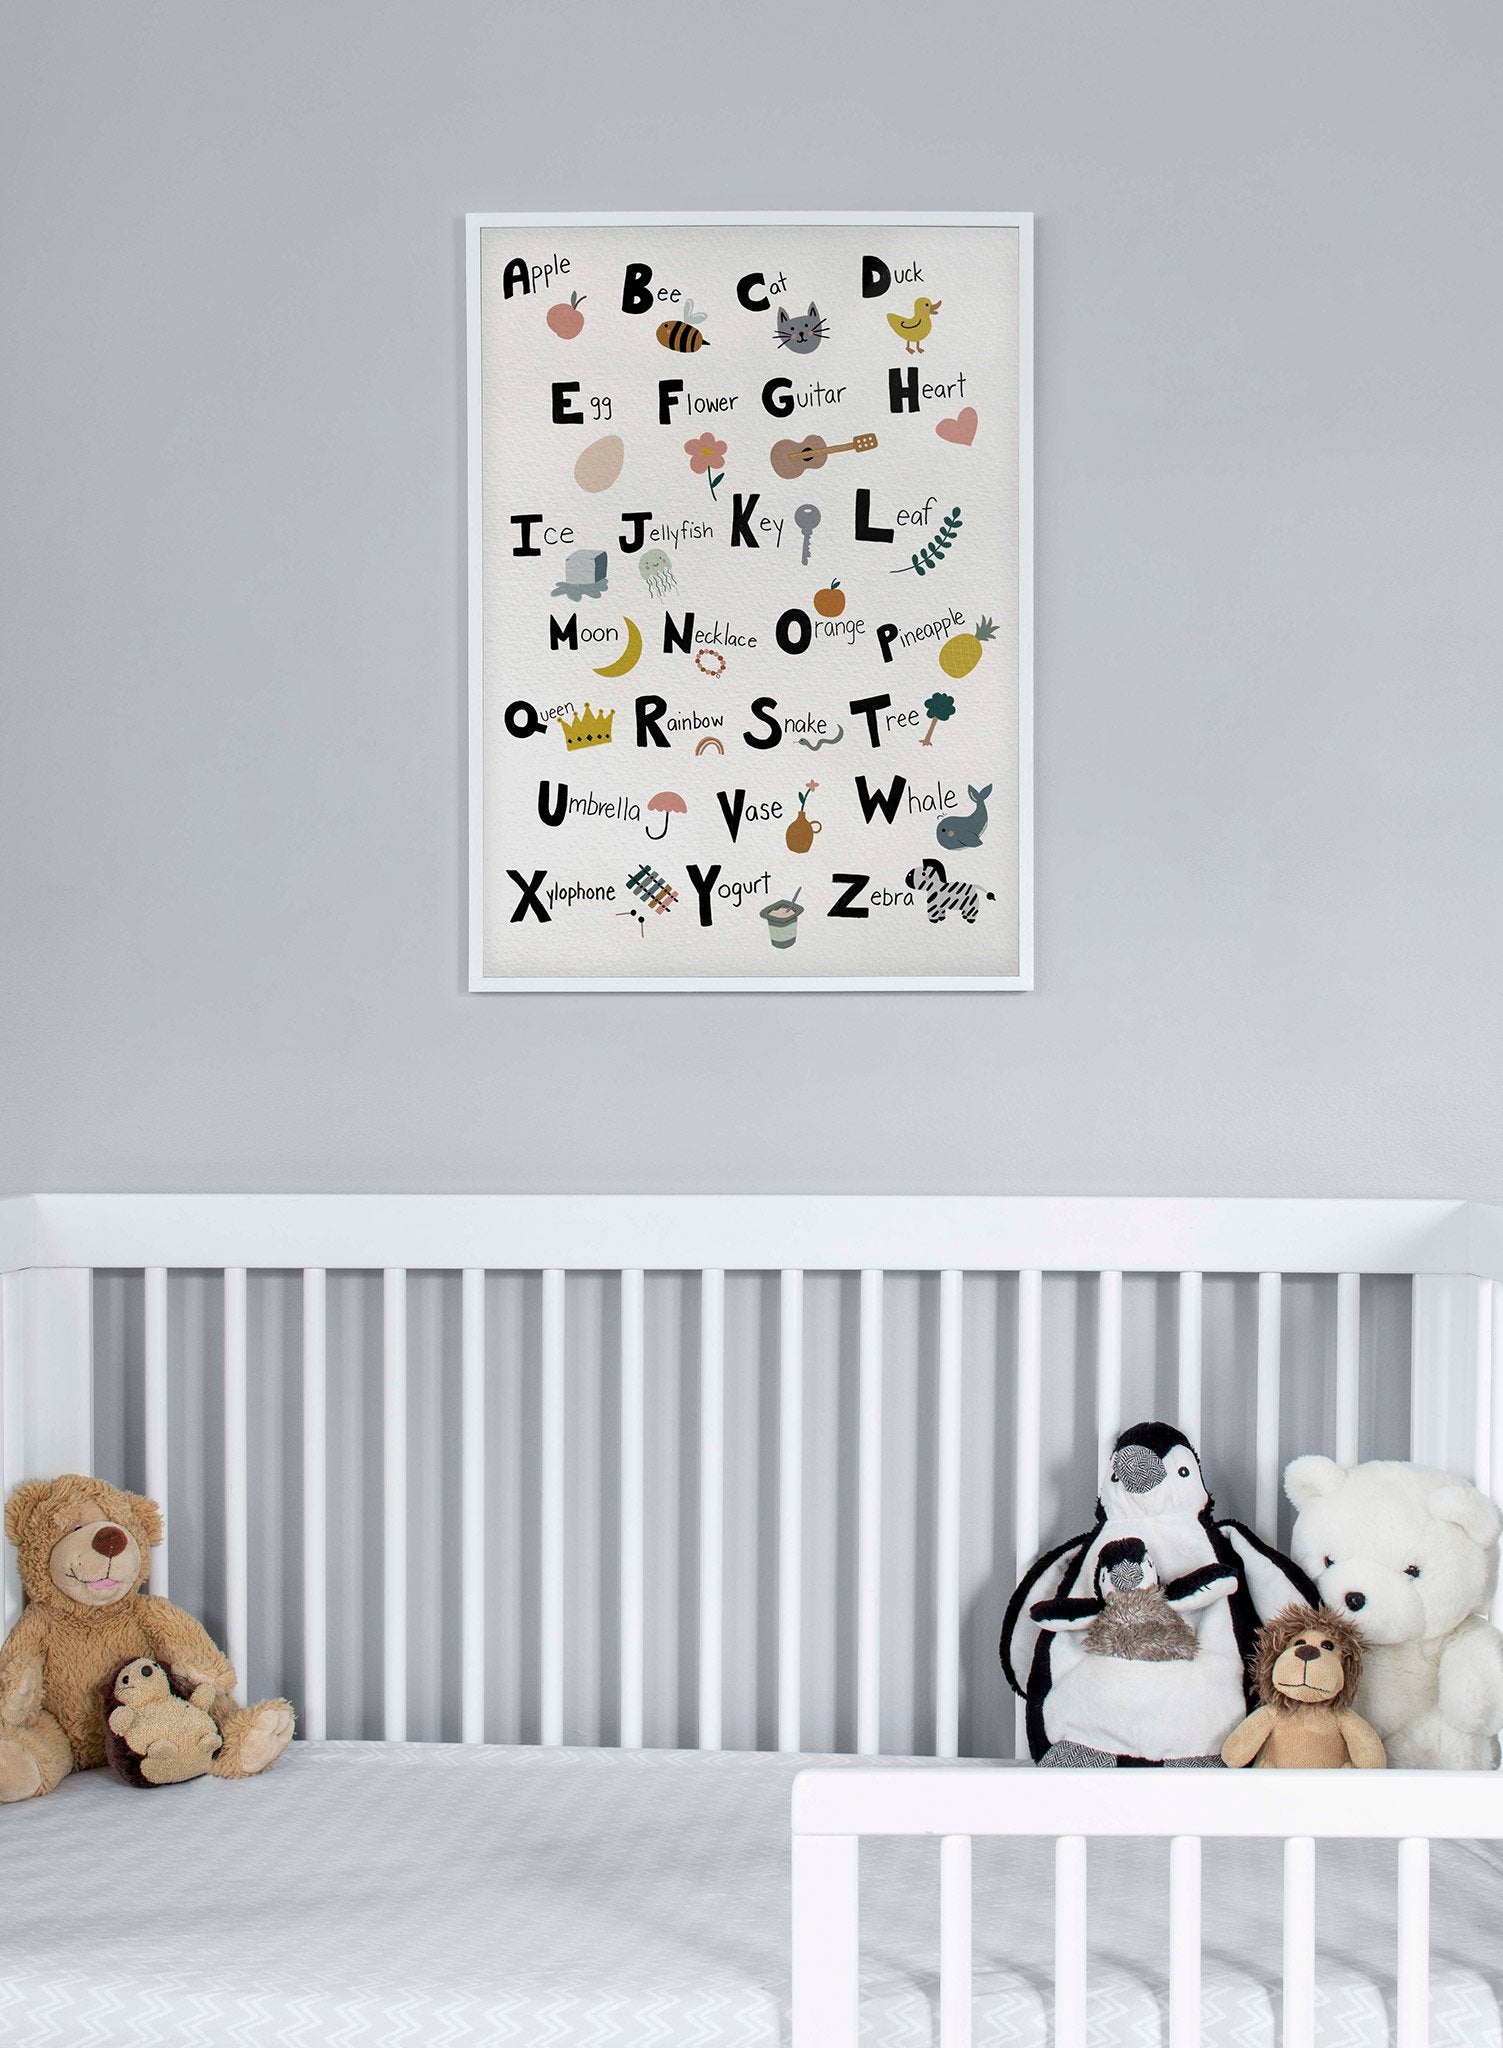 Kids nursery poster by Opposite Wall with Alphabet illustrations